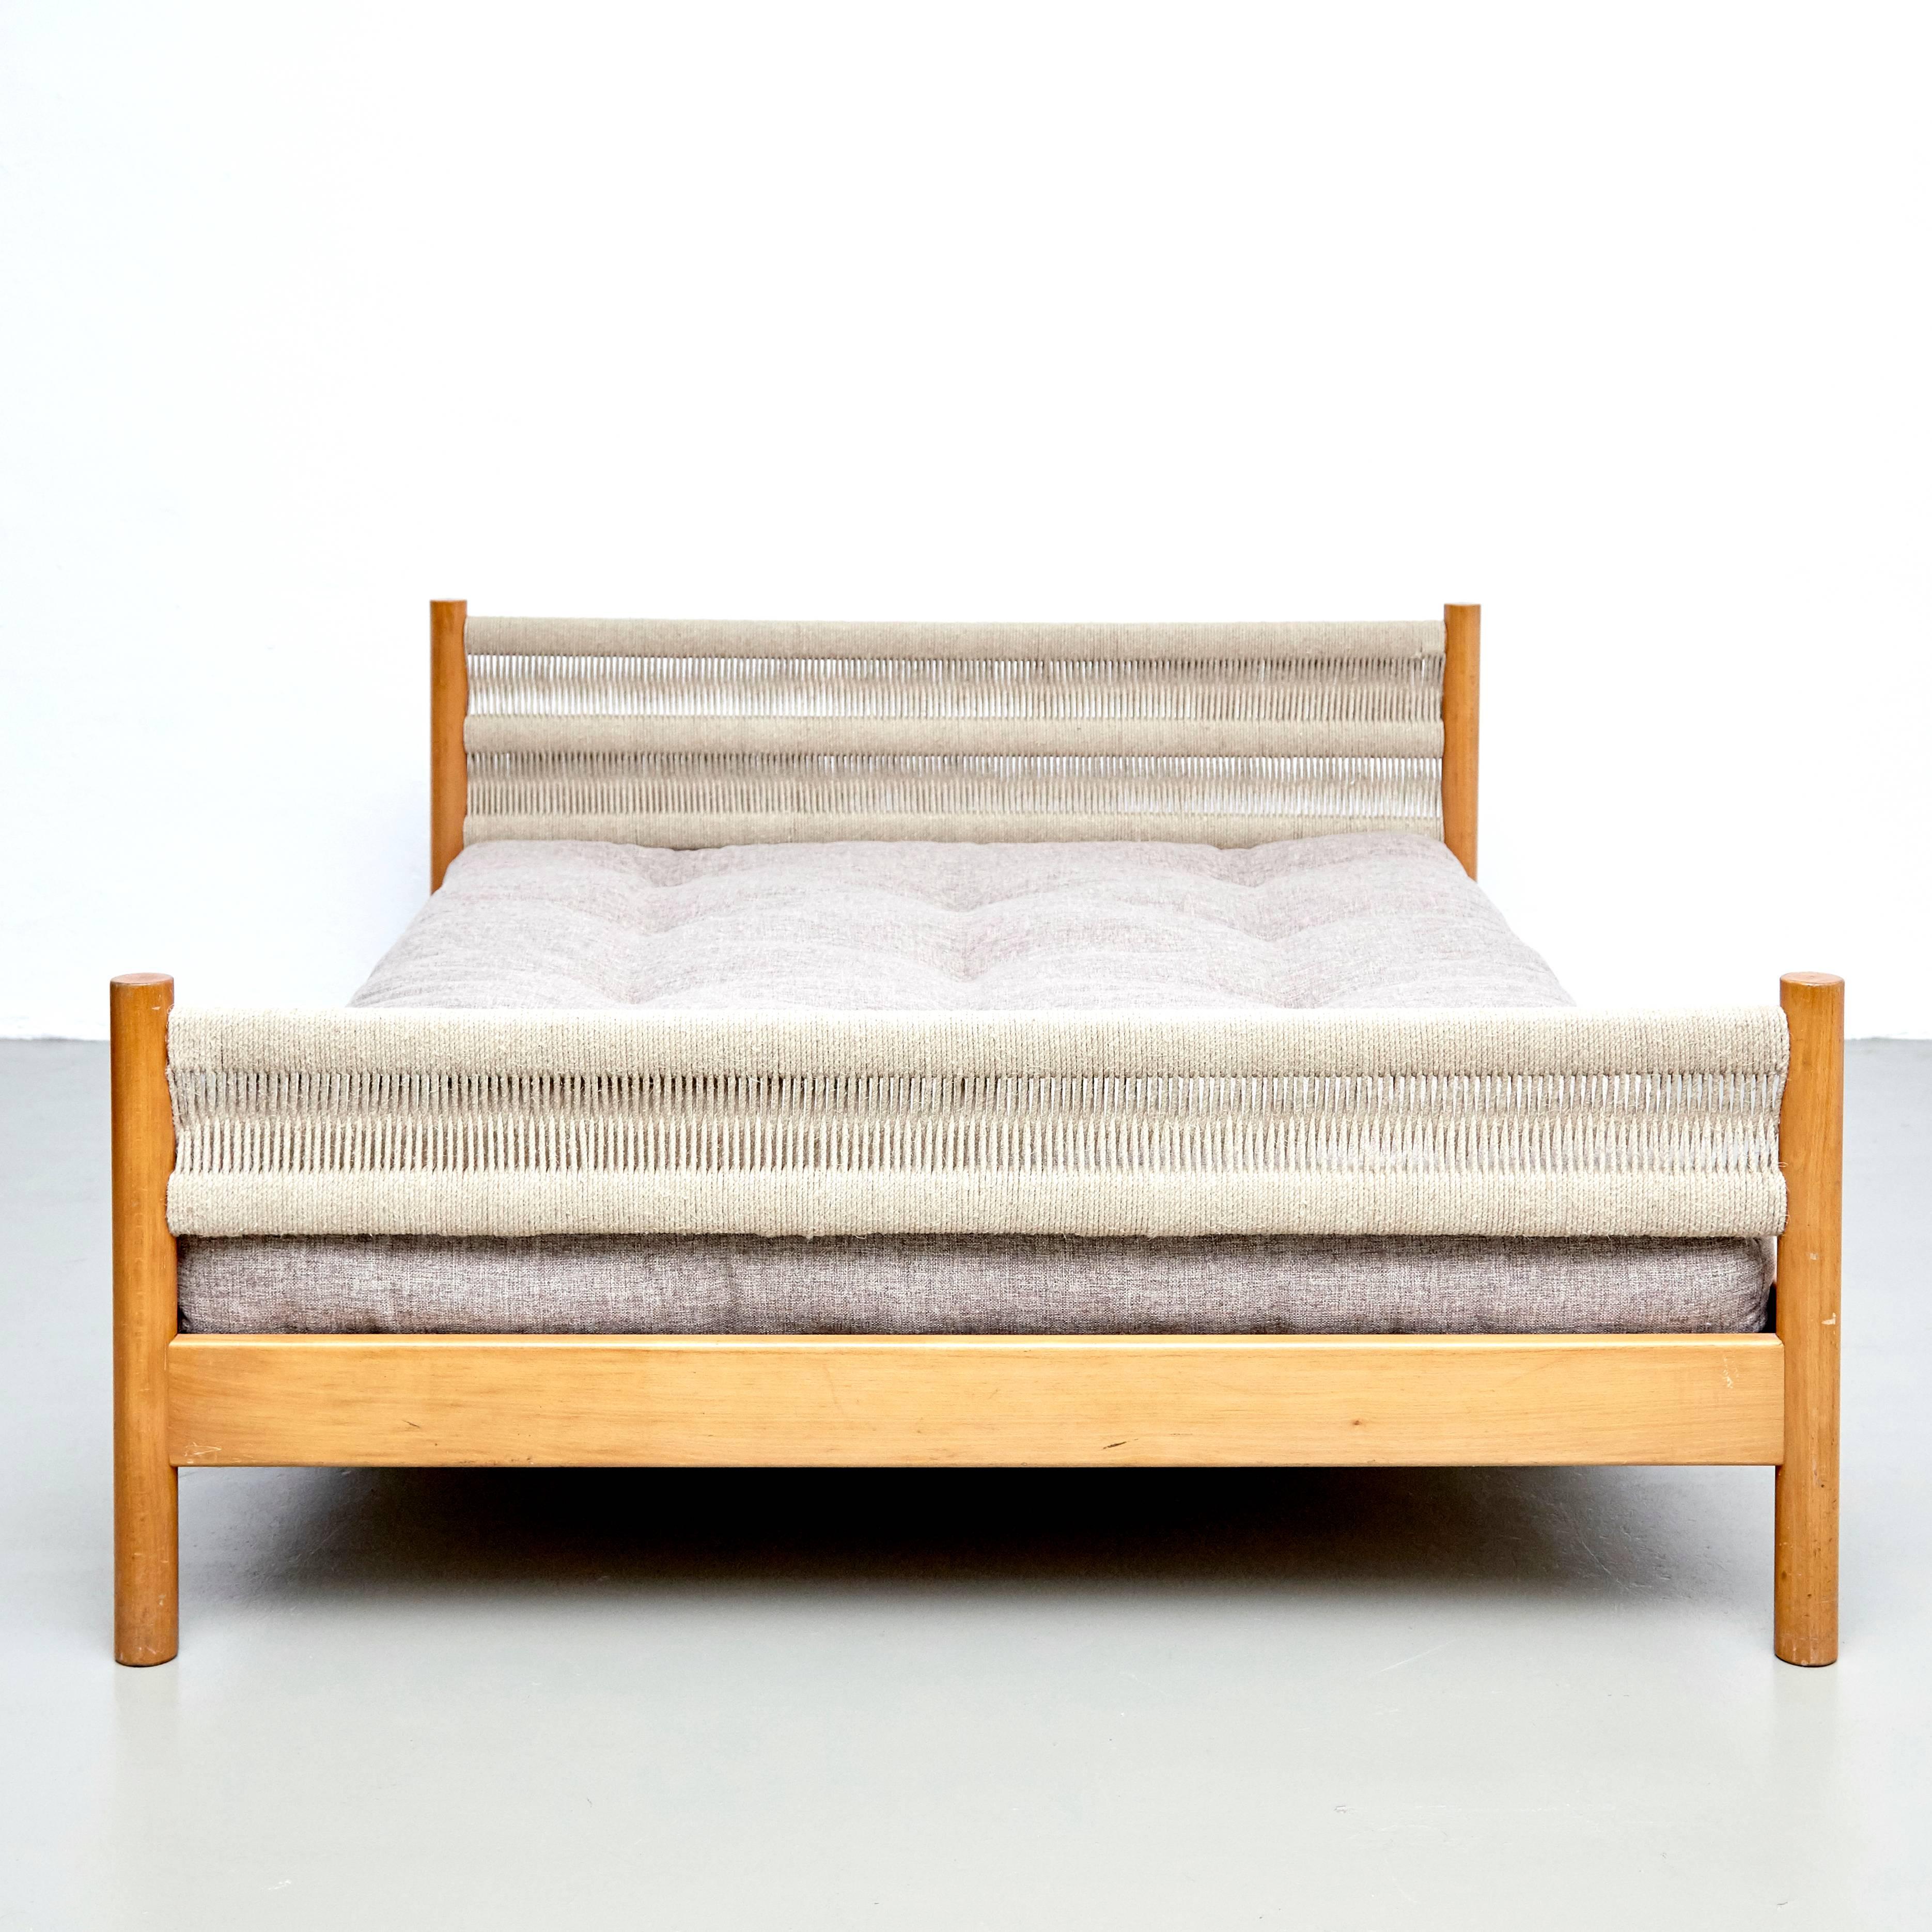 Bed designed by Charlotte Perriand for Meribel, circa 1960.
Manufactured in France.

Pinewood and rope, new upholstery.

In good original condition with minor wear consistent with age and use, preserving a beautiful patina.

Charlotte